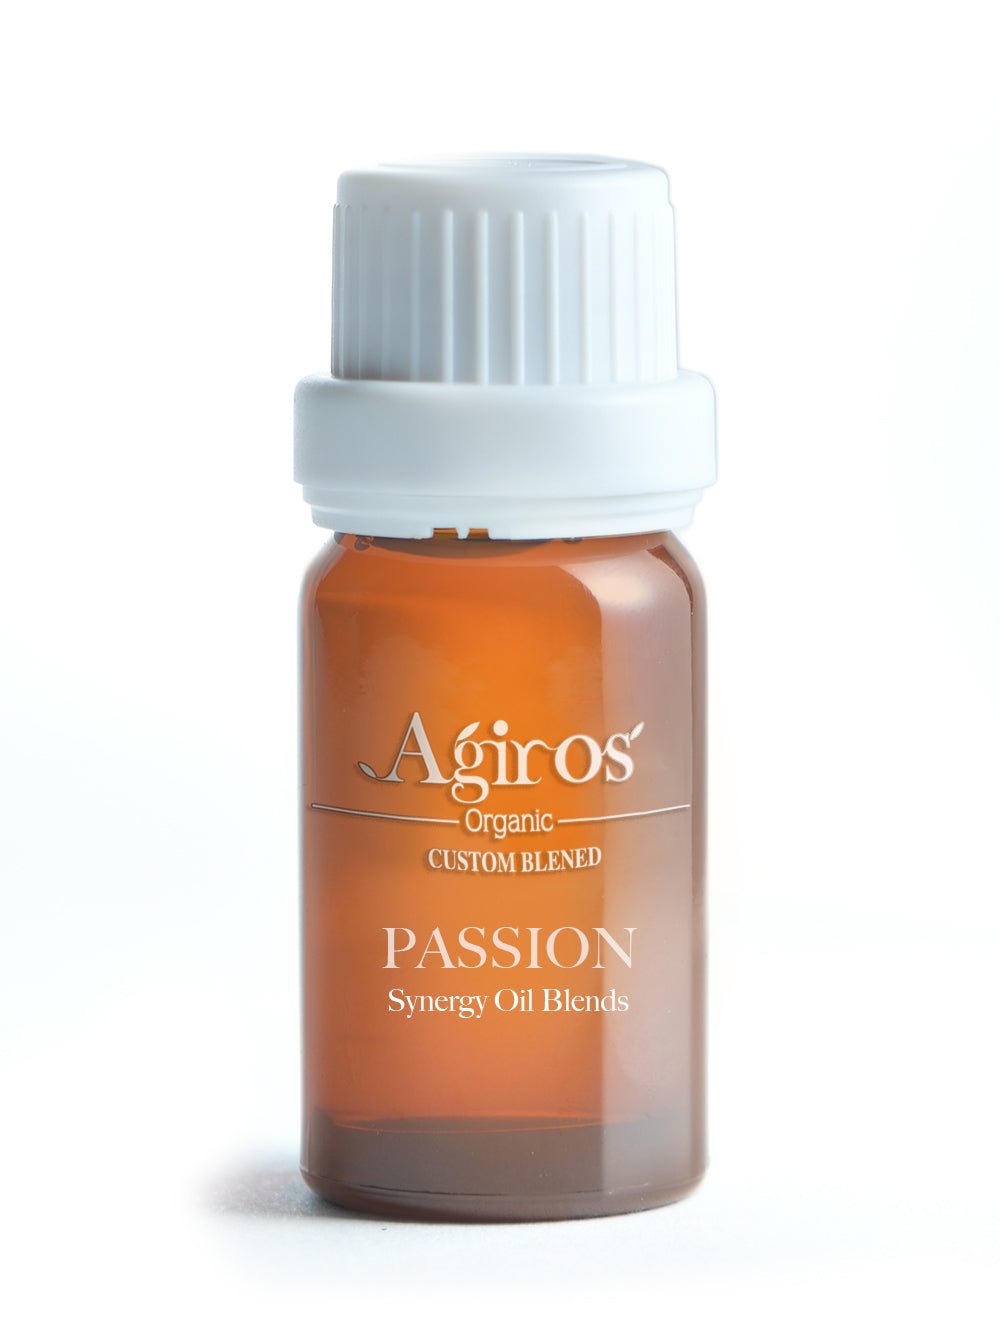 Synergy Oil Blends (Passion)